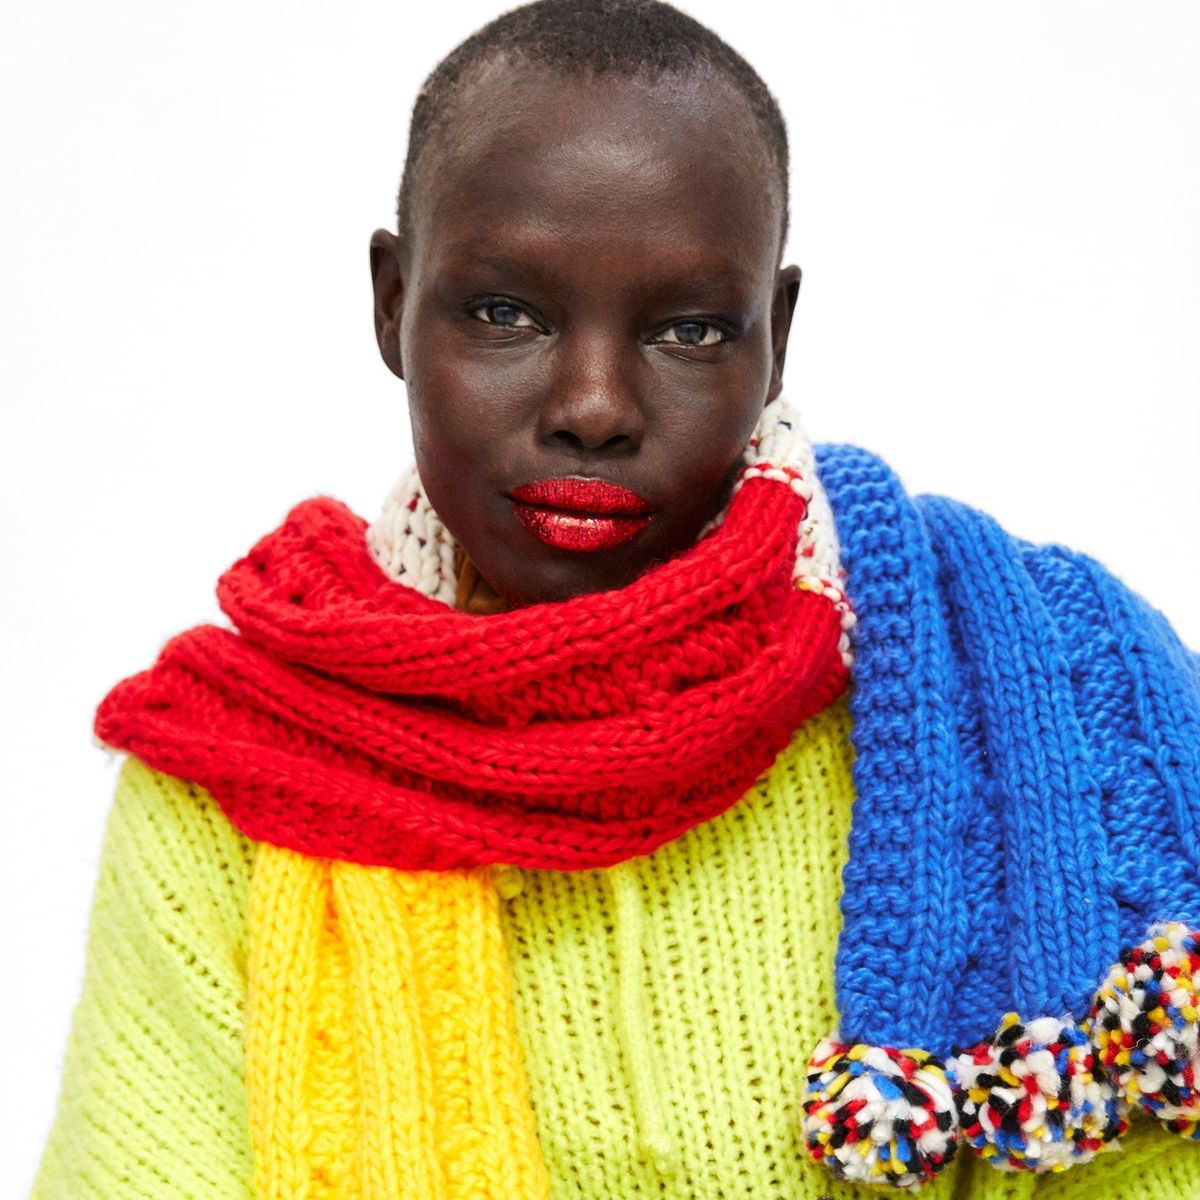 The Oversized Scarf Trend We All Want in On